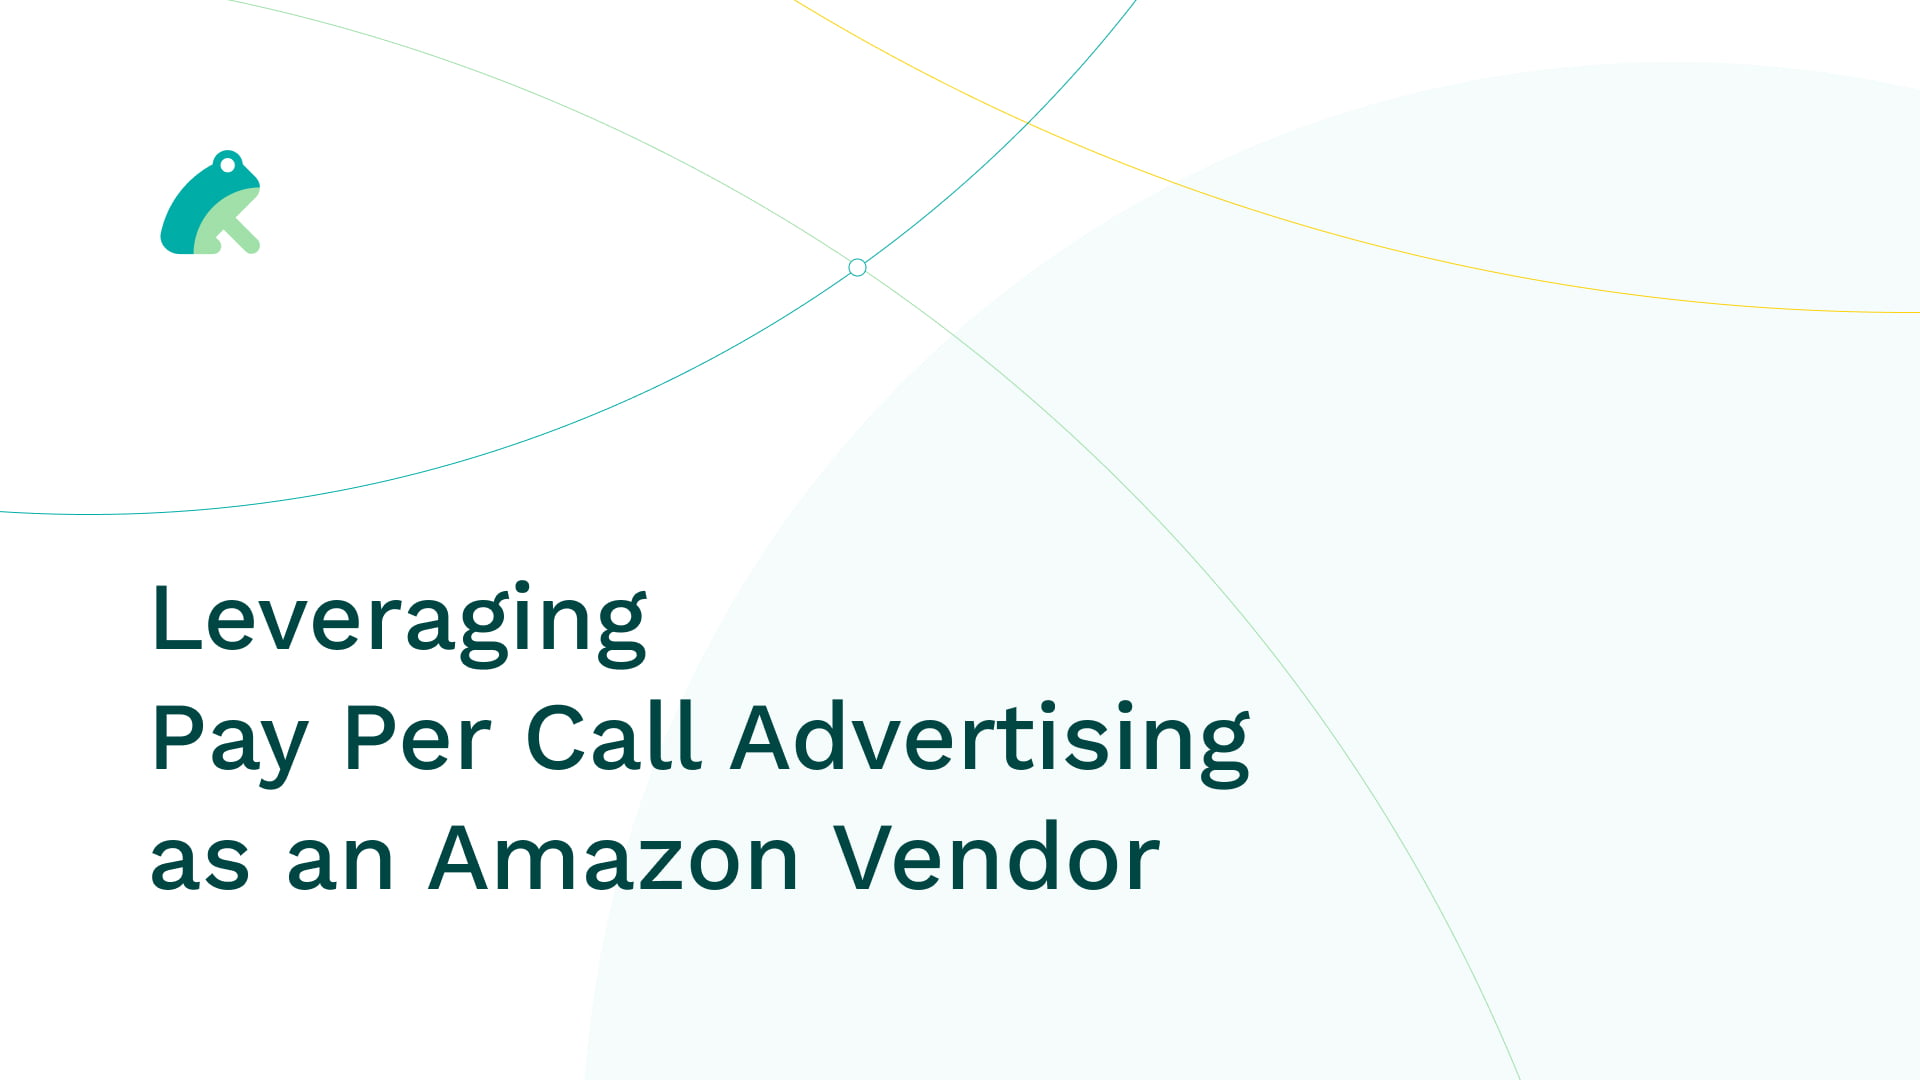 Leveraging Pay Per Call Advertising as an Amazon Vendor